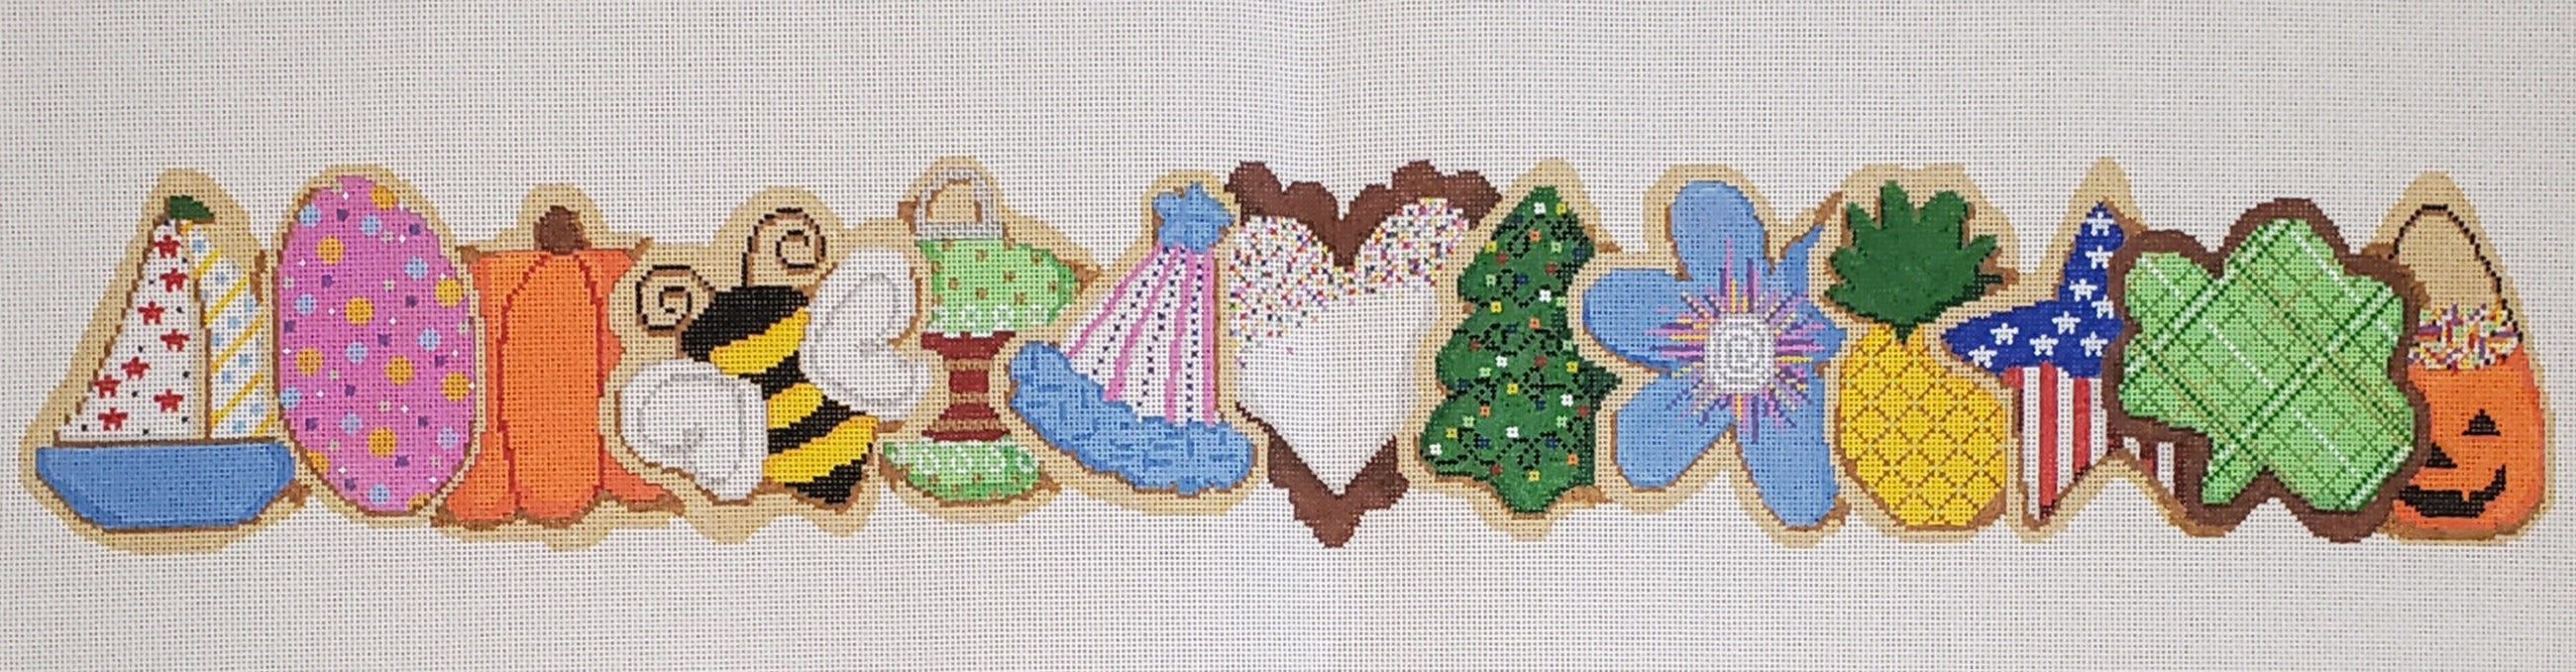 All Holiday Cookies Apron Row w/Christmas LL-APR-3